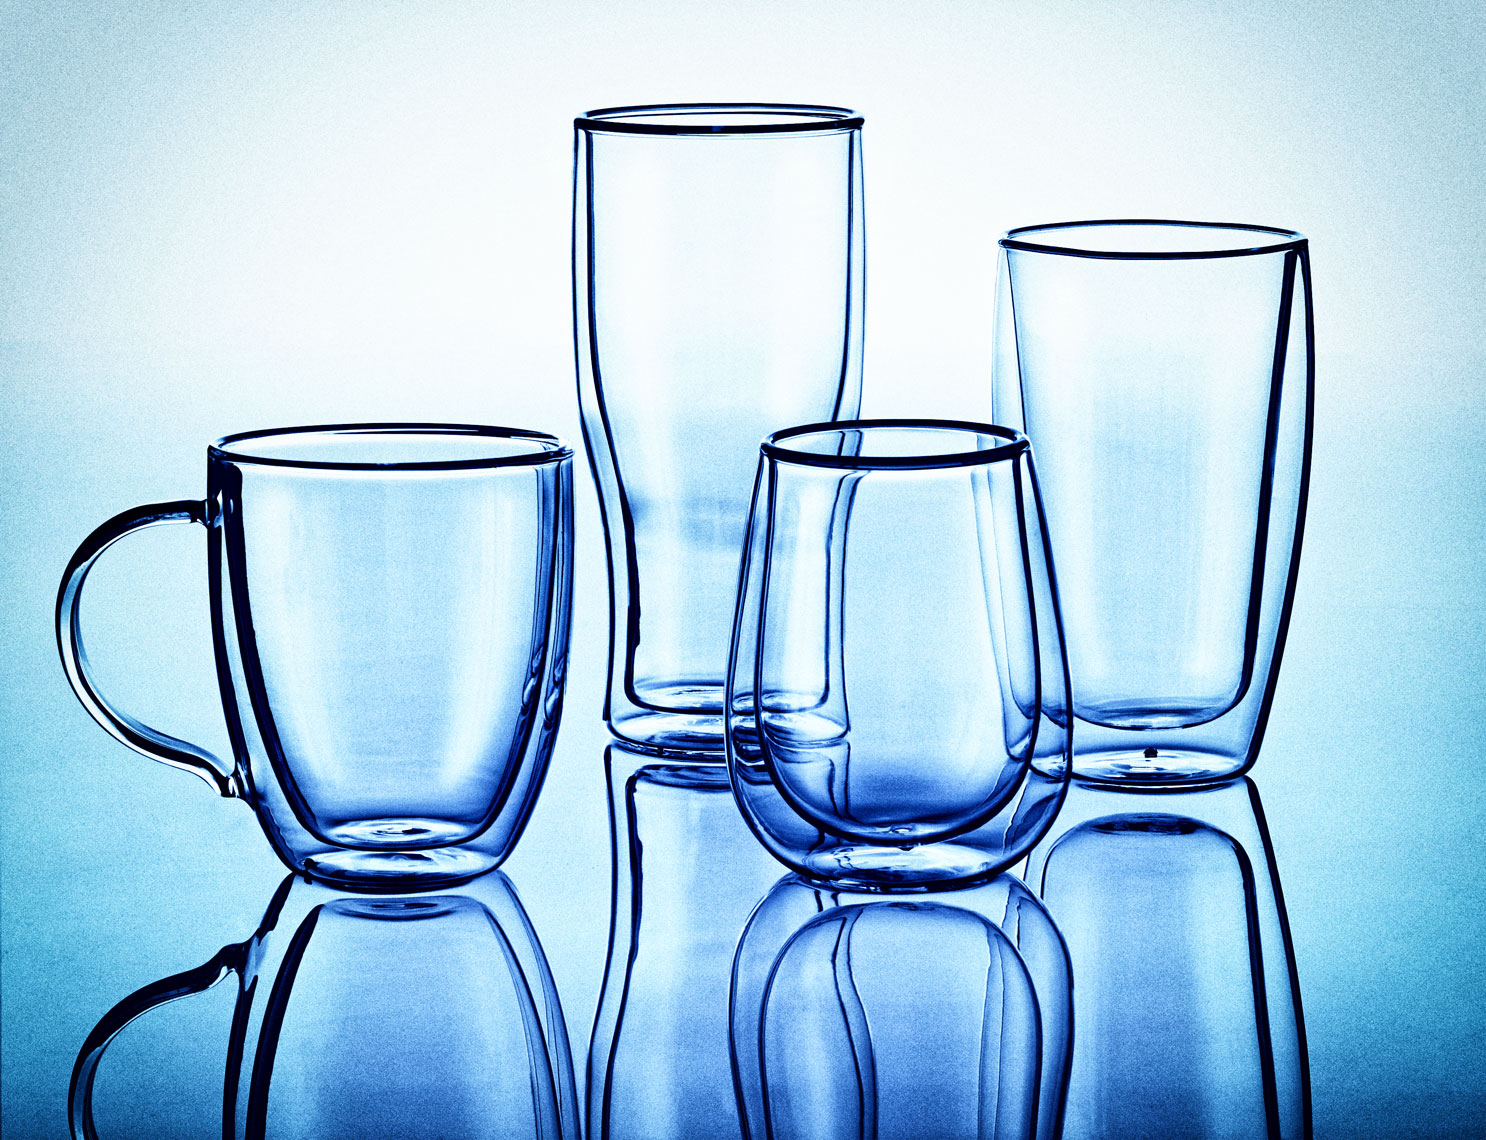 Drinking glasses/blue background/product photography